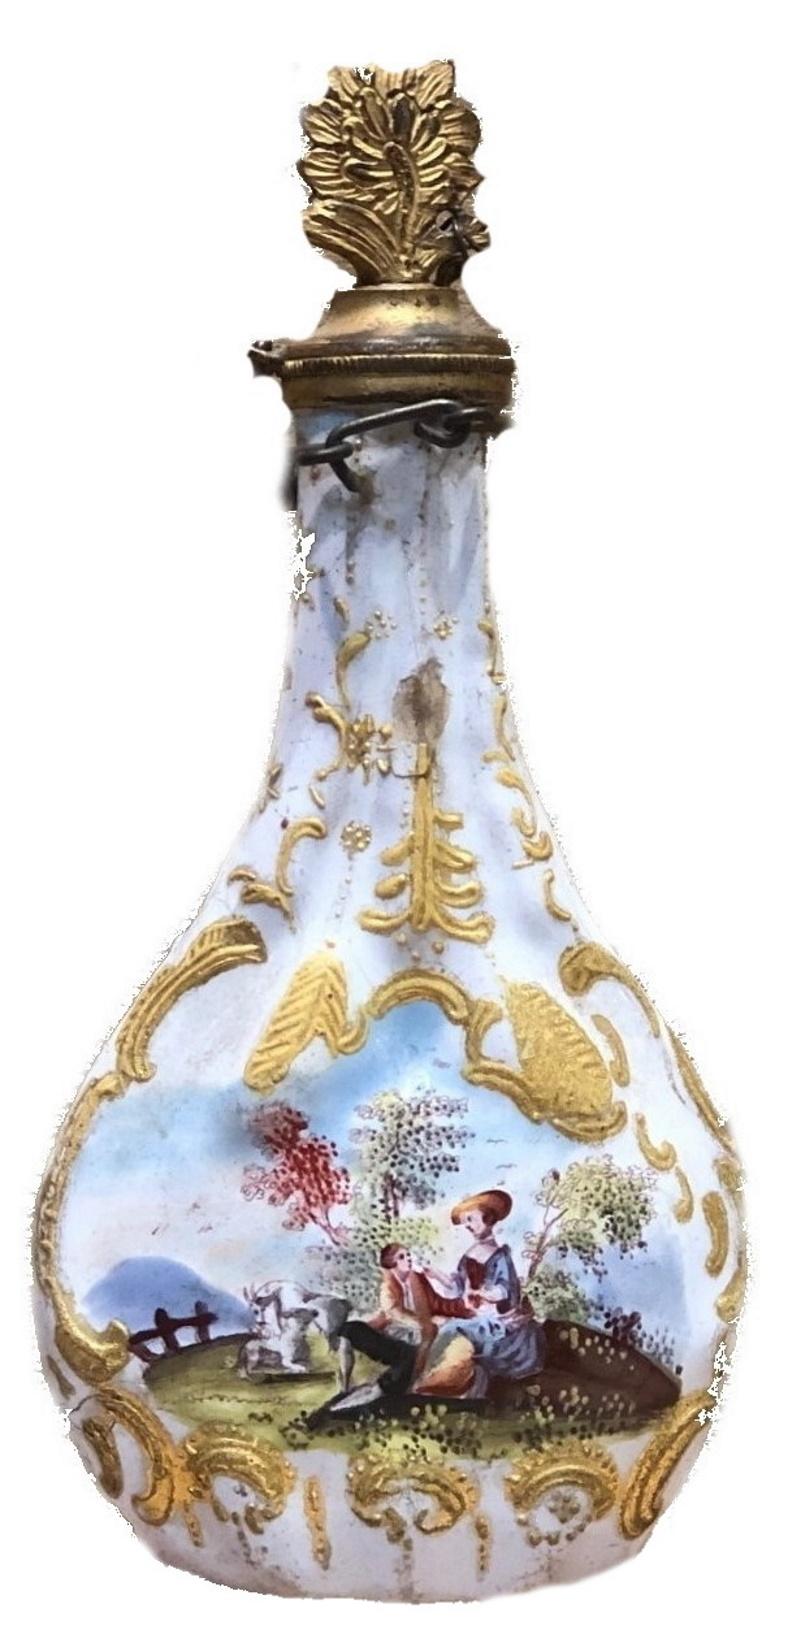 This rare 18th century snuff bottle made of copper is covered all over its surface with a beautiful pastoral painting, depicting two different scenes of gallant courtship on both sides – a noble lady and a cavalier on one side; and a shepherd with a